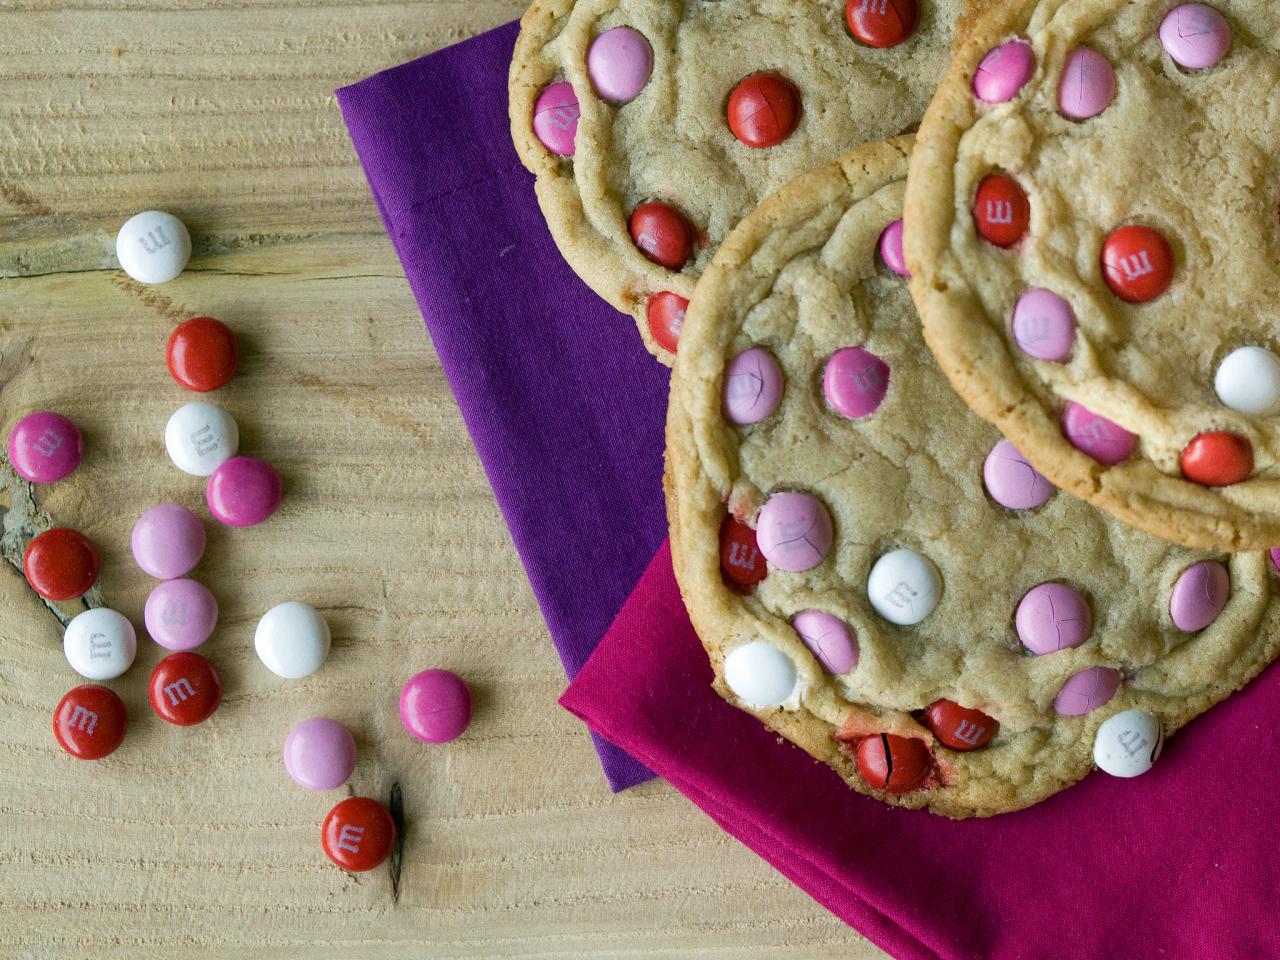 Bakery Style Giant M&M Cookies - Recipes For Holidays